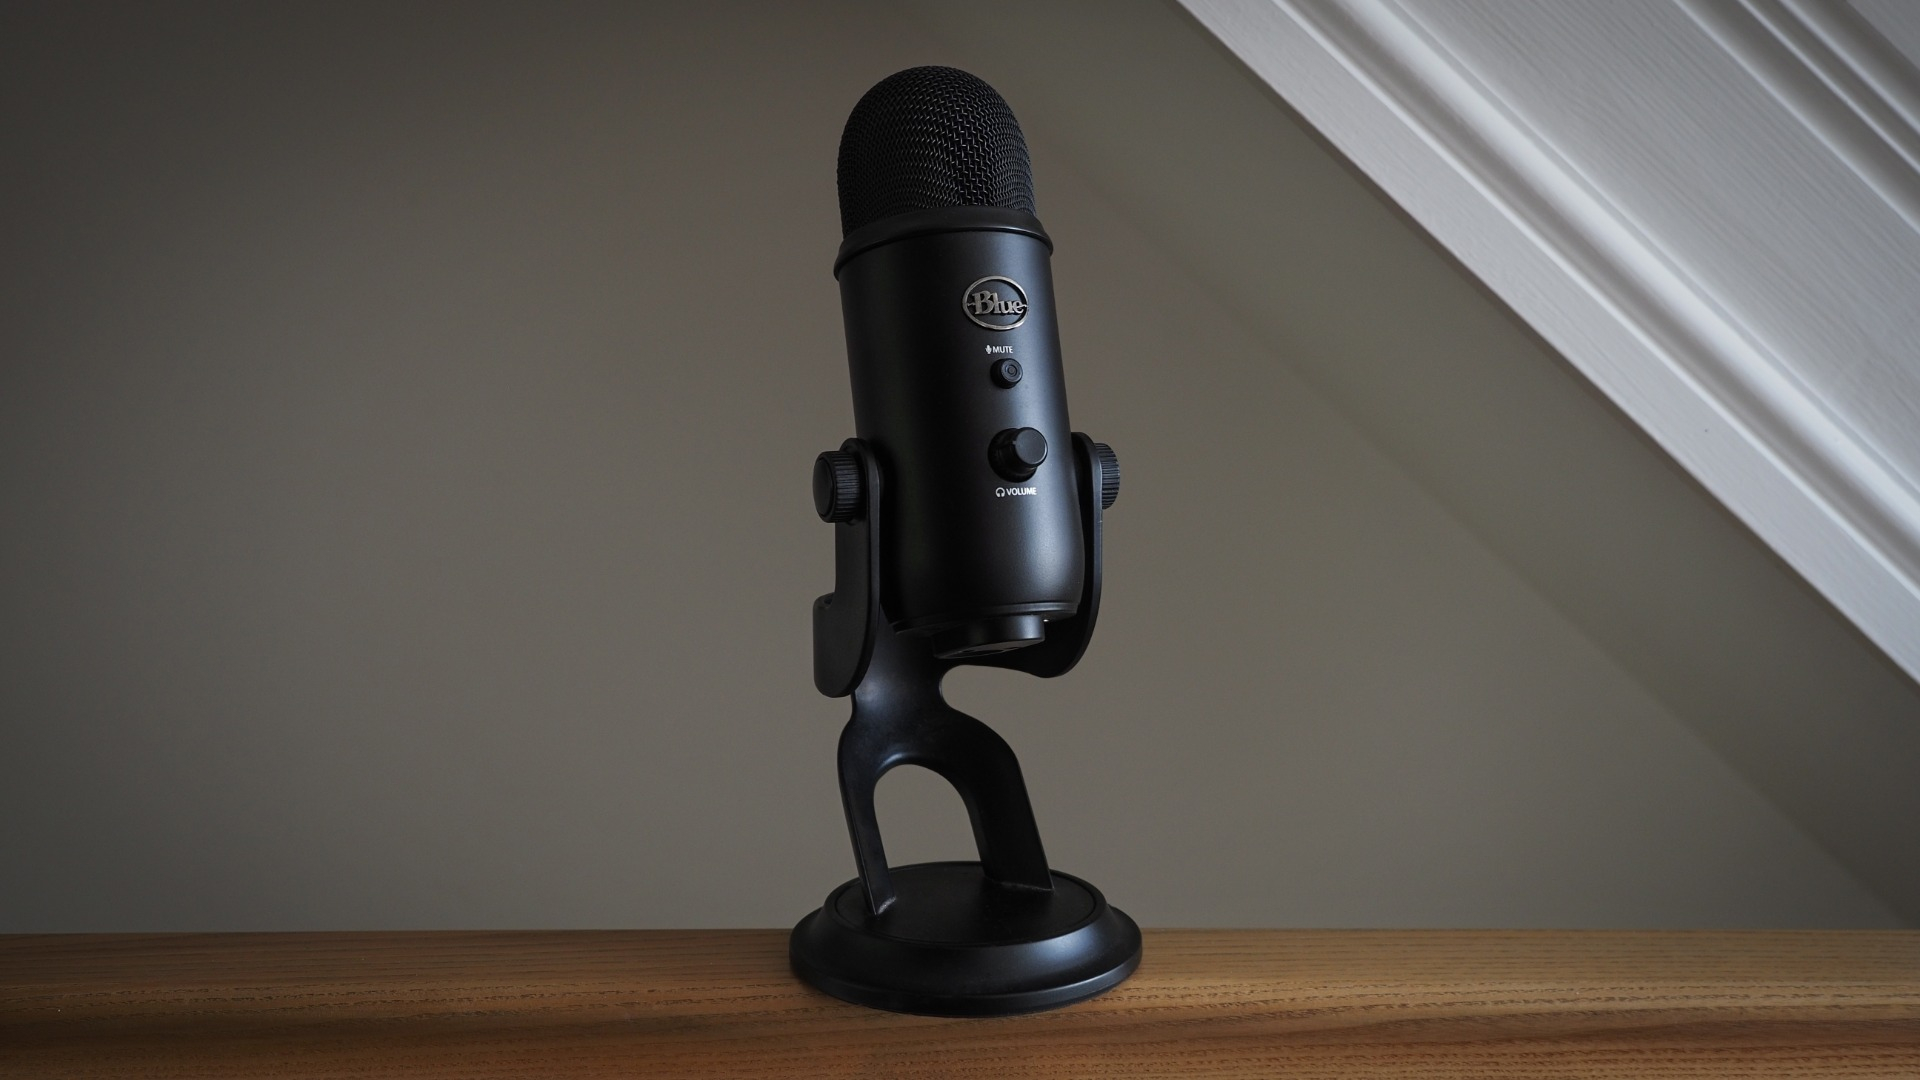 Blue Yeti review: a top streaming microphone for gamers